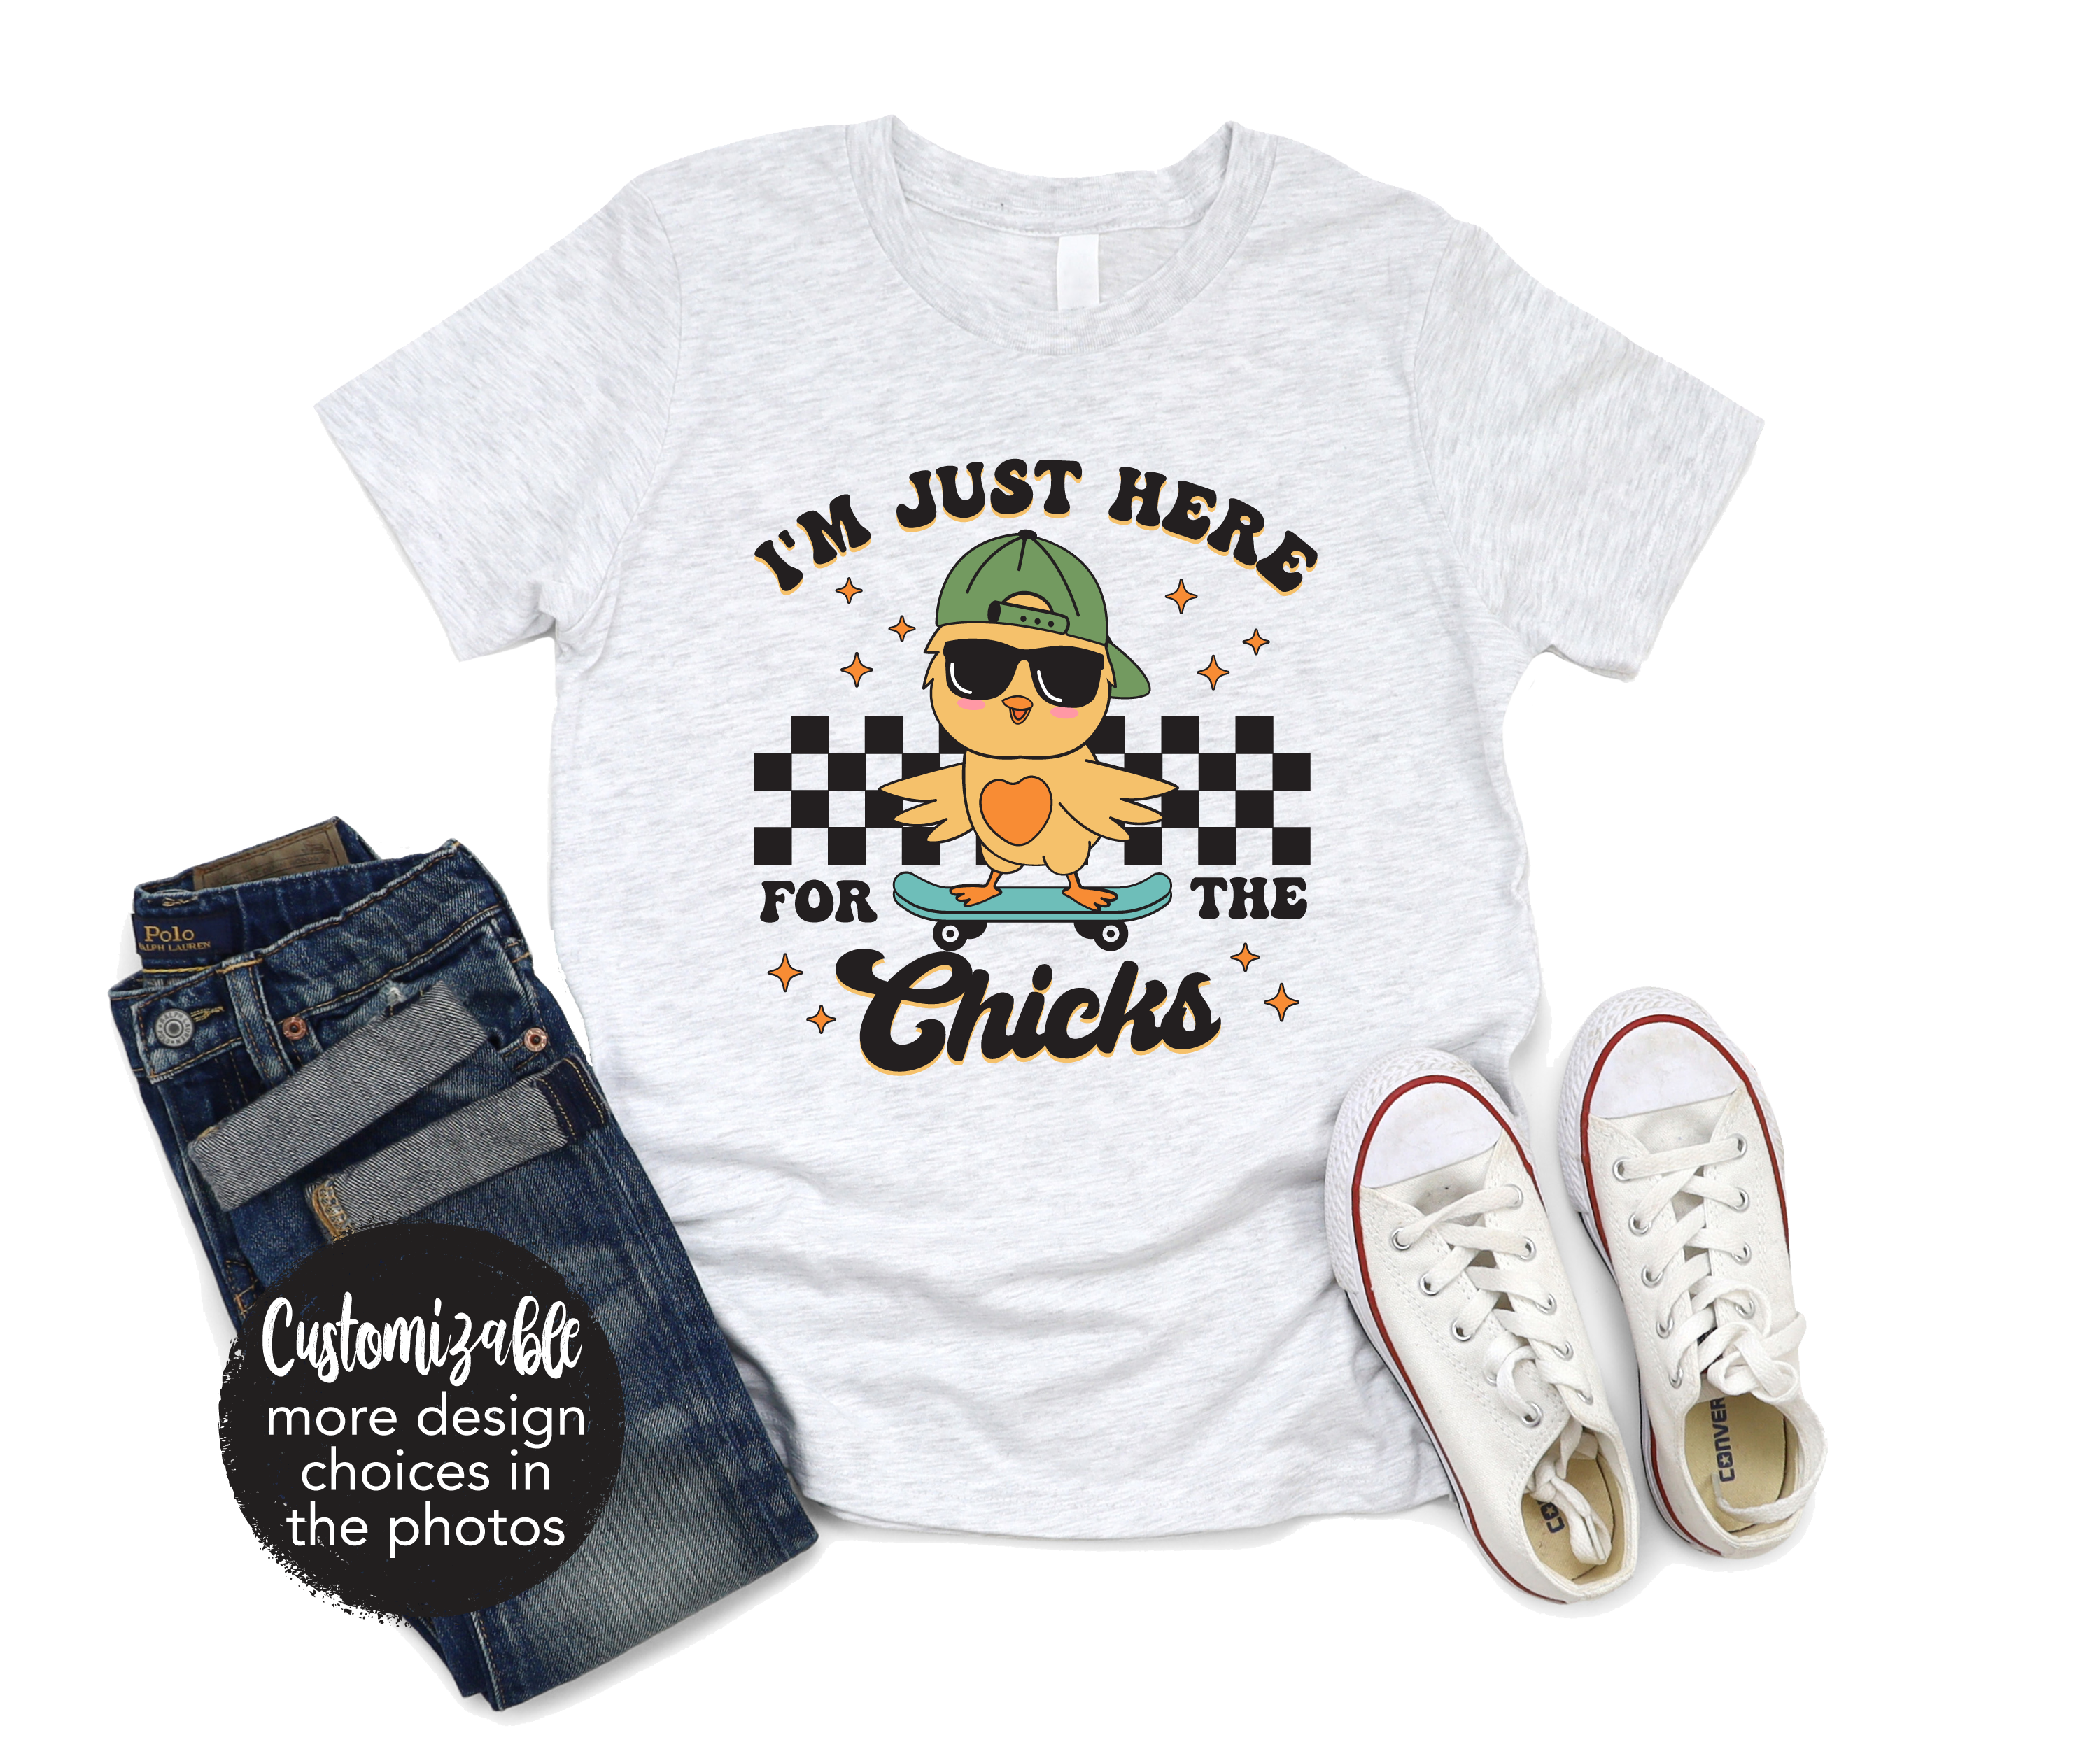 I'm Just Here for the Chicks Tie Dye Retro Chick Shirt Easter Spring Girl Boy Unisex Tie Dye Tee